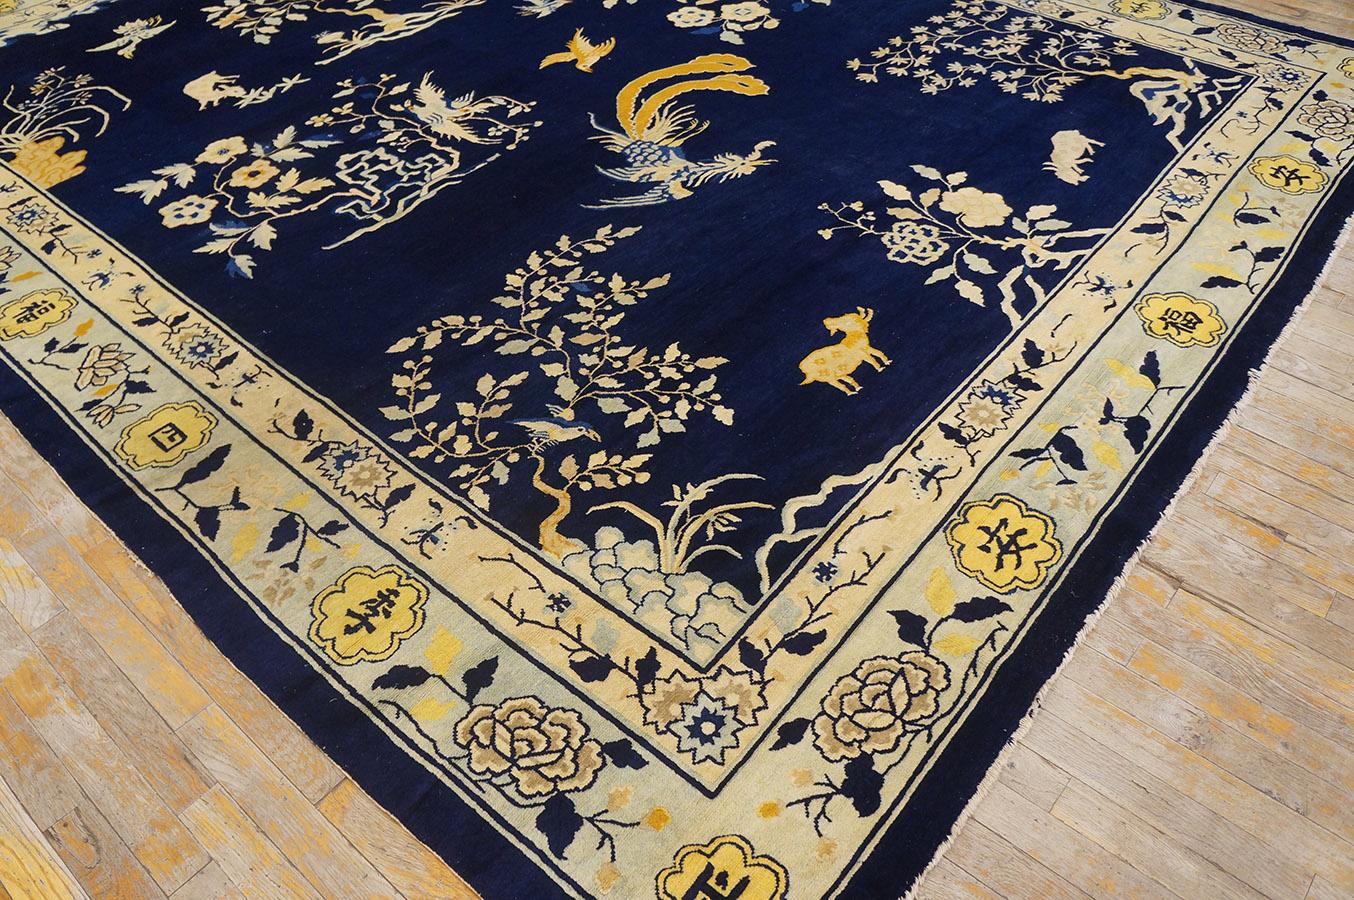 19th Century Chinese Peking Carpet ( 9'2'' x 11'8' - 280 x 355 ) In Good Condition For Sale In New York, NY